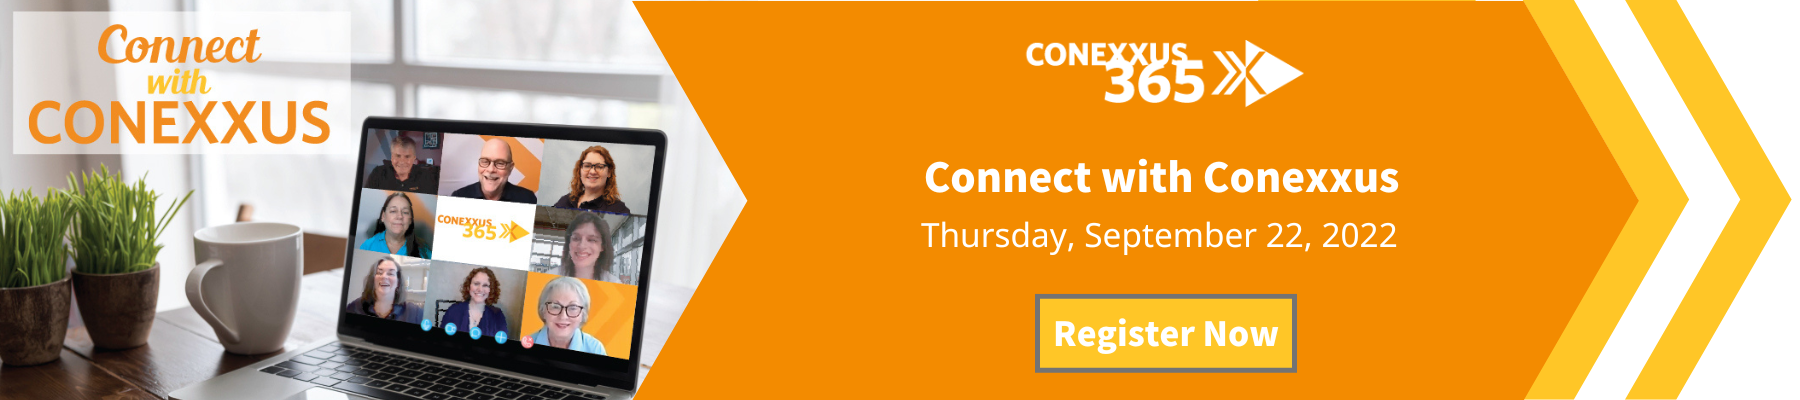 Connect with Conexxus - September